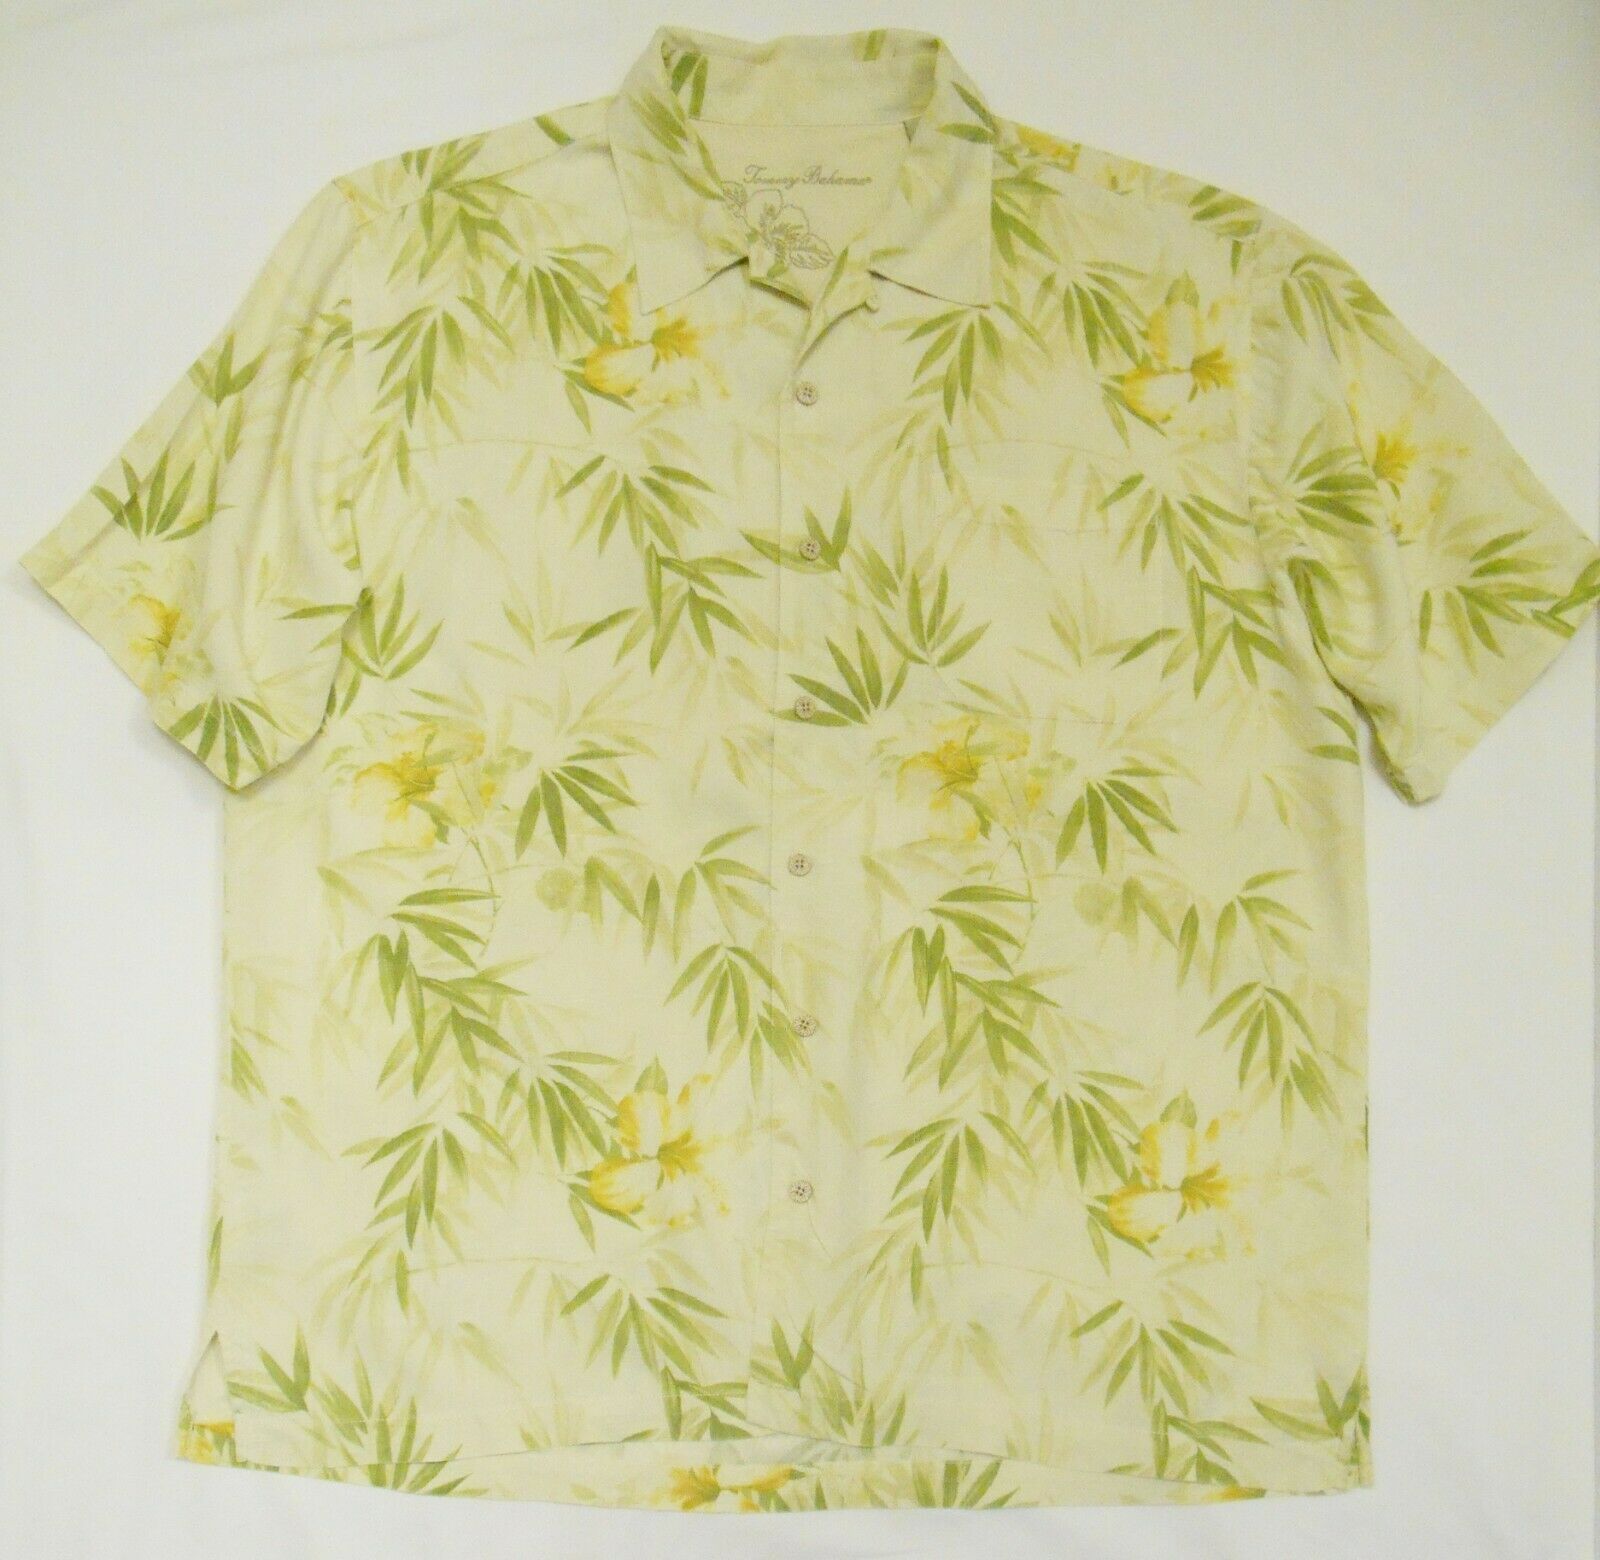 Primary image for TOMMY BAHAMA Men's 100% SILK SHIRT Green Tropical Floral Short Sleeve Sz XL